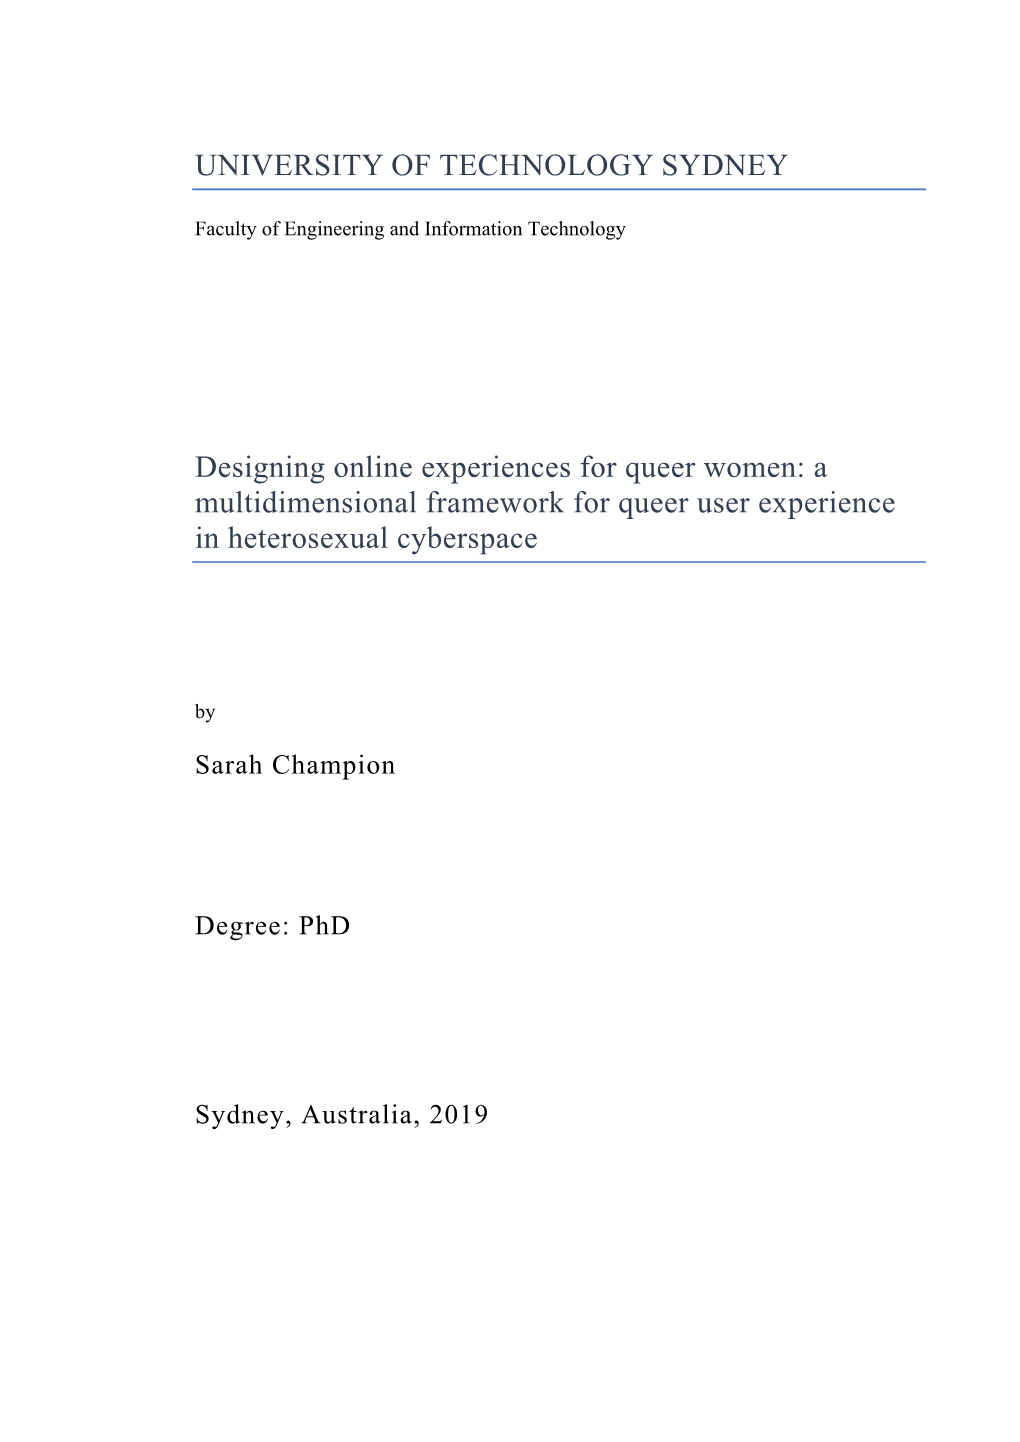 Designing Online Experiences for Queer Women: a Multidimensional Framework for Queer User Experience in Heterosexual Cyberspace